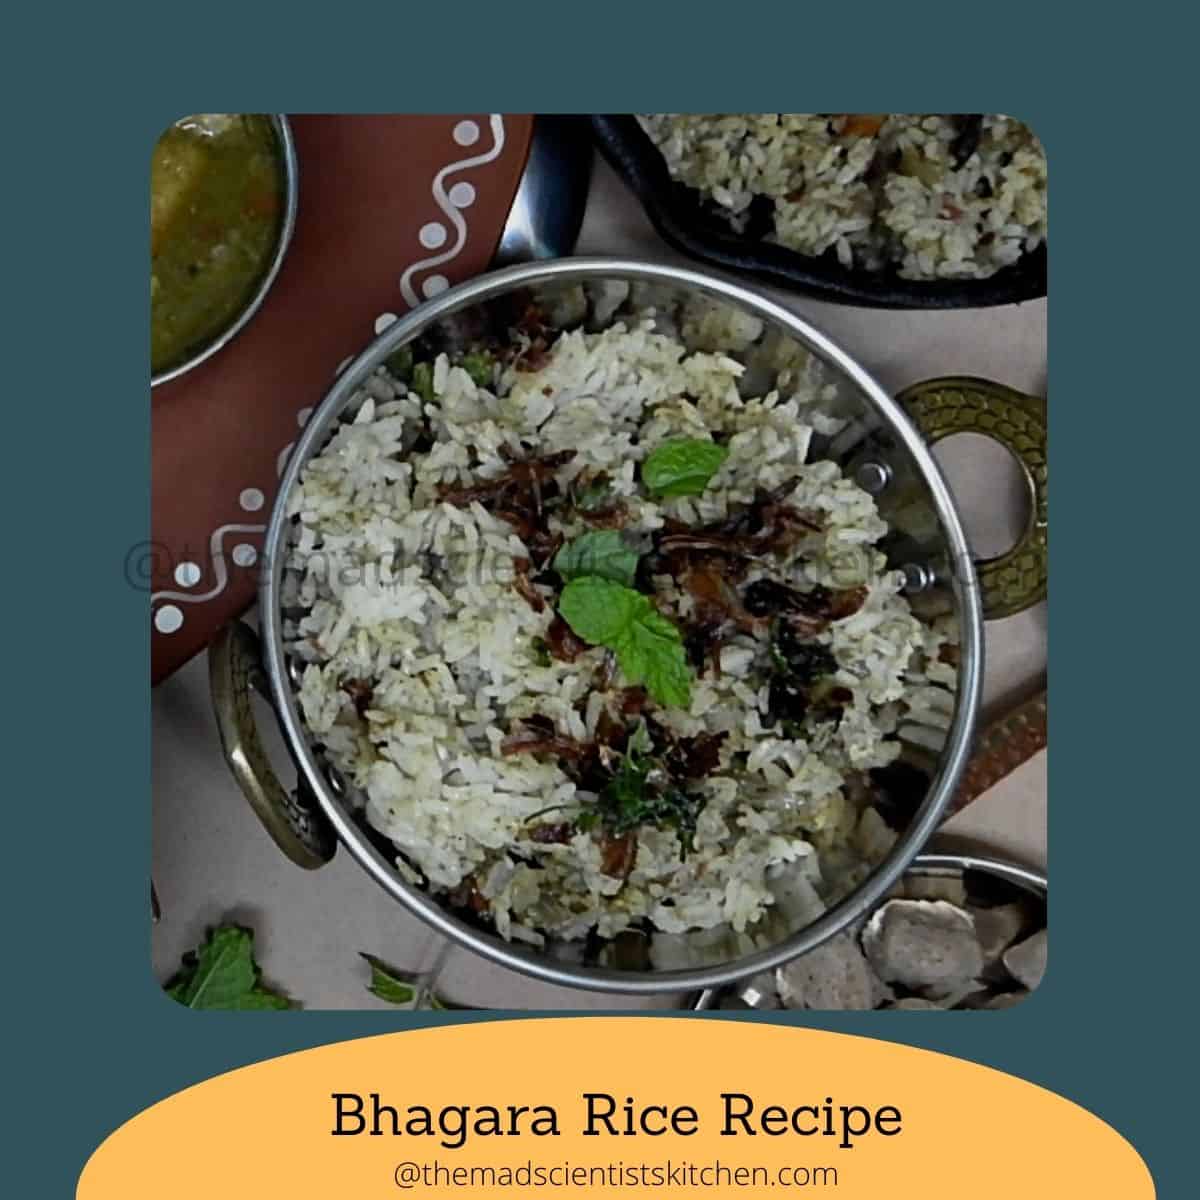 Bhagara Rice and Veg Dalcha was our combo for the day